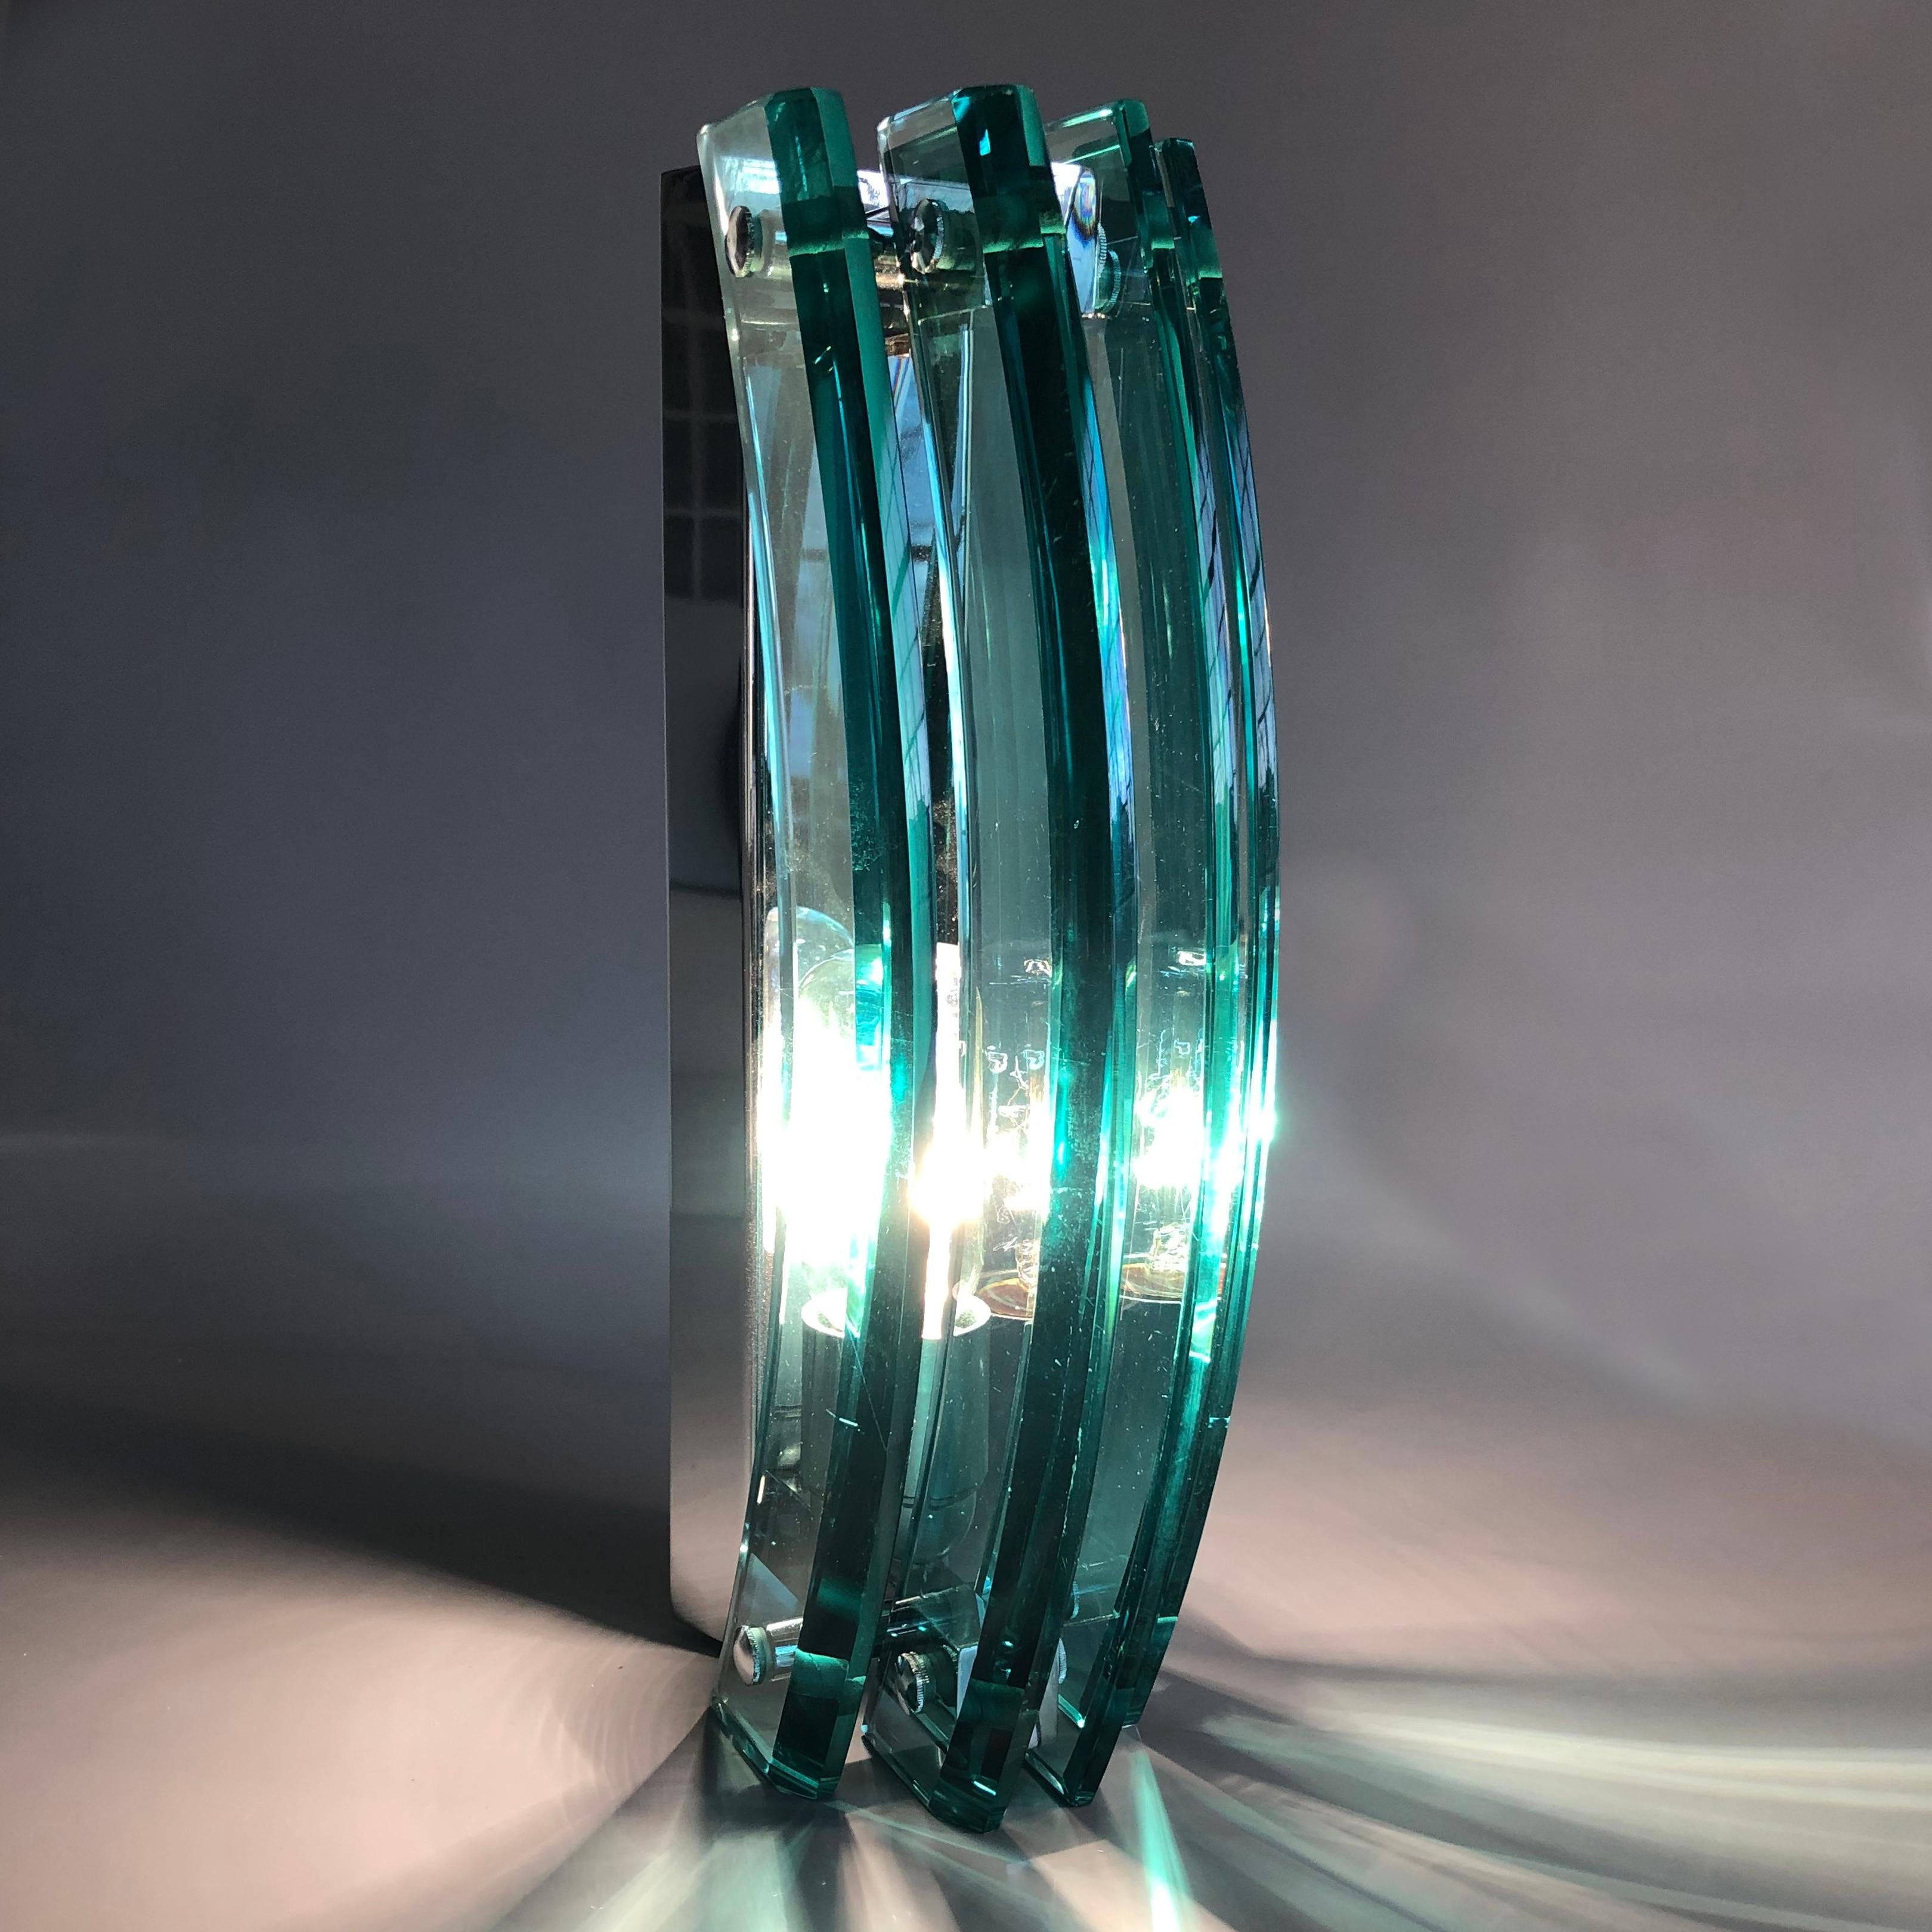 Pair of Emerald Green Murano Glass Wall Lights, Florence Italy 1970s For Sale 11